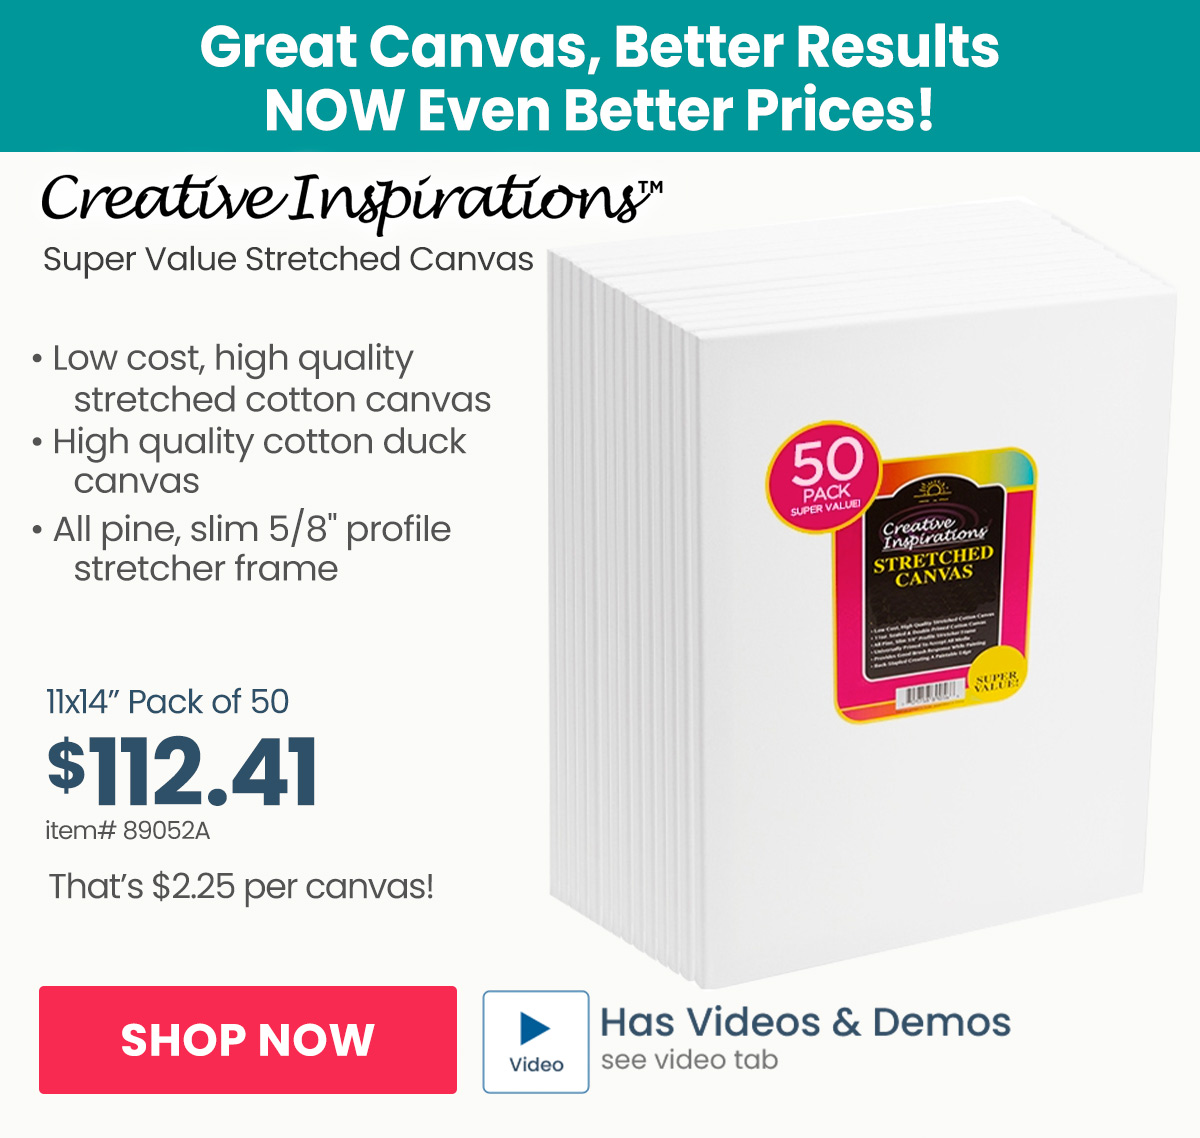 Super Value Stretched Canvas by Creative Inspirations